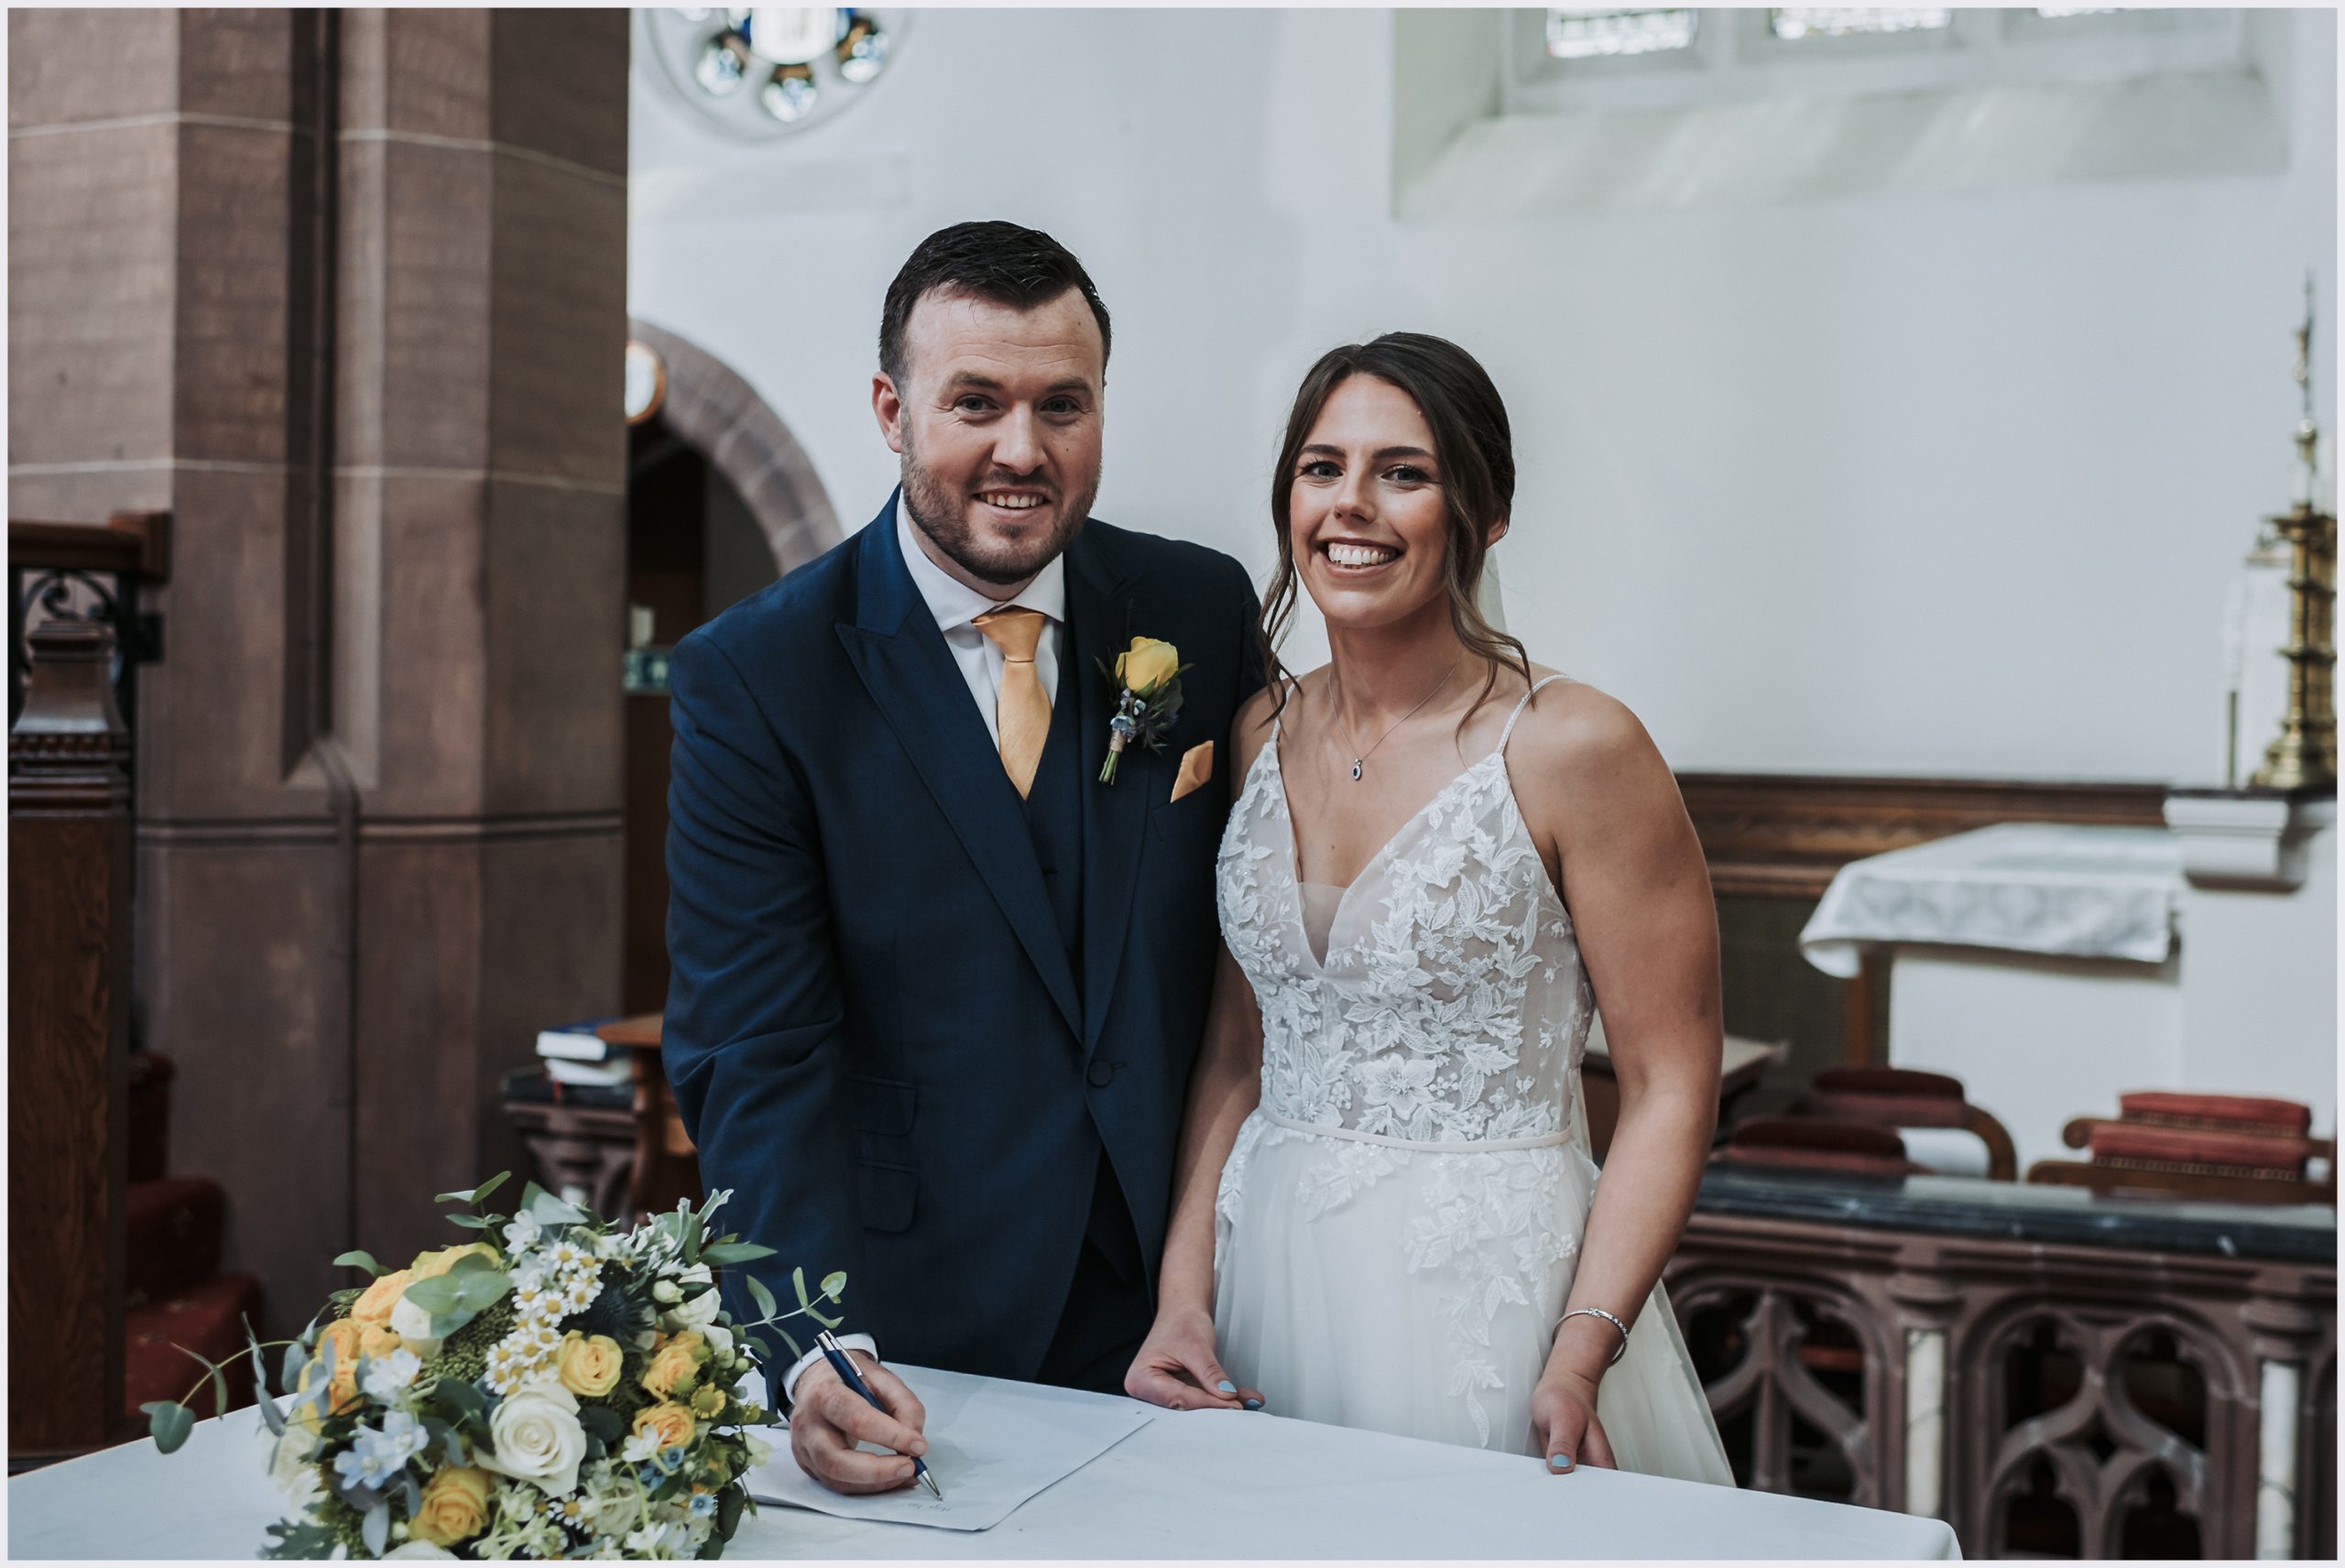 A bride and groom pose smiling at the camera after signing the register at their church wedding ceremony.  Image taken by Chester wedding photographer Helena Jayne Photography